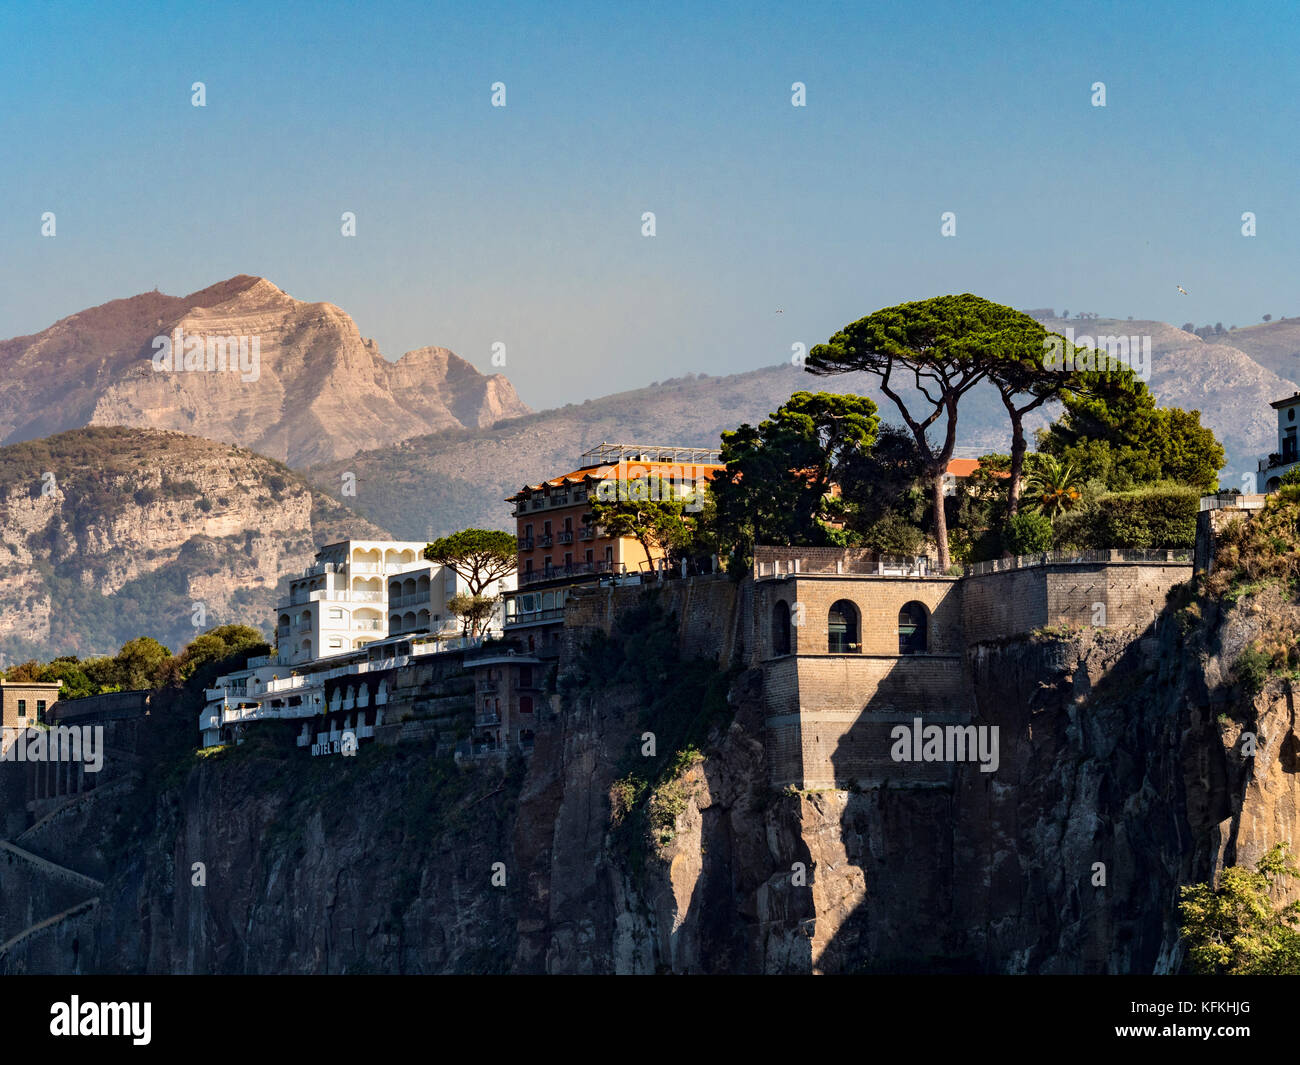 Cliff edge Grand Hotel Riviera with mountain landscape in the background and Stone pine trees in the foreground. Sorrento. Italy. Stock Photo